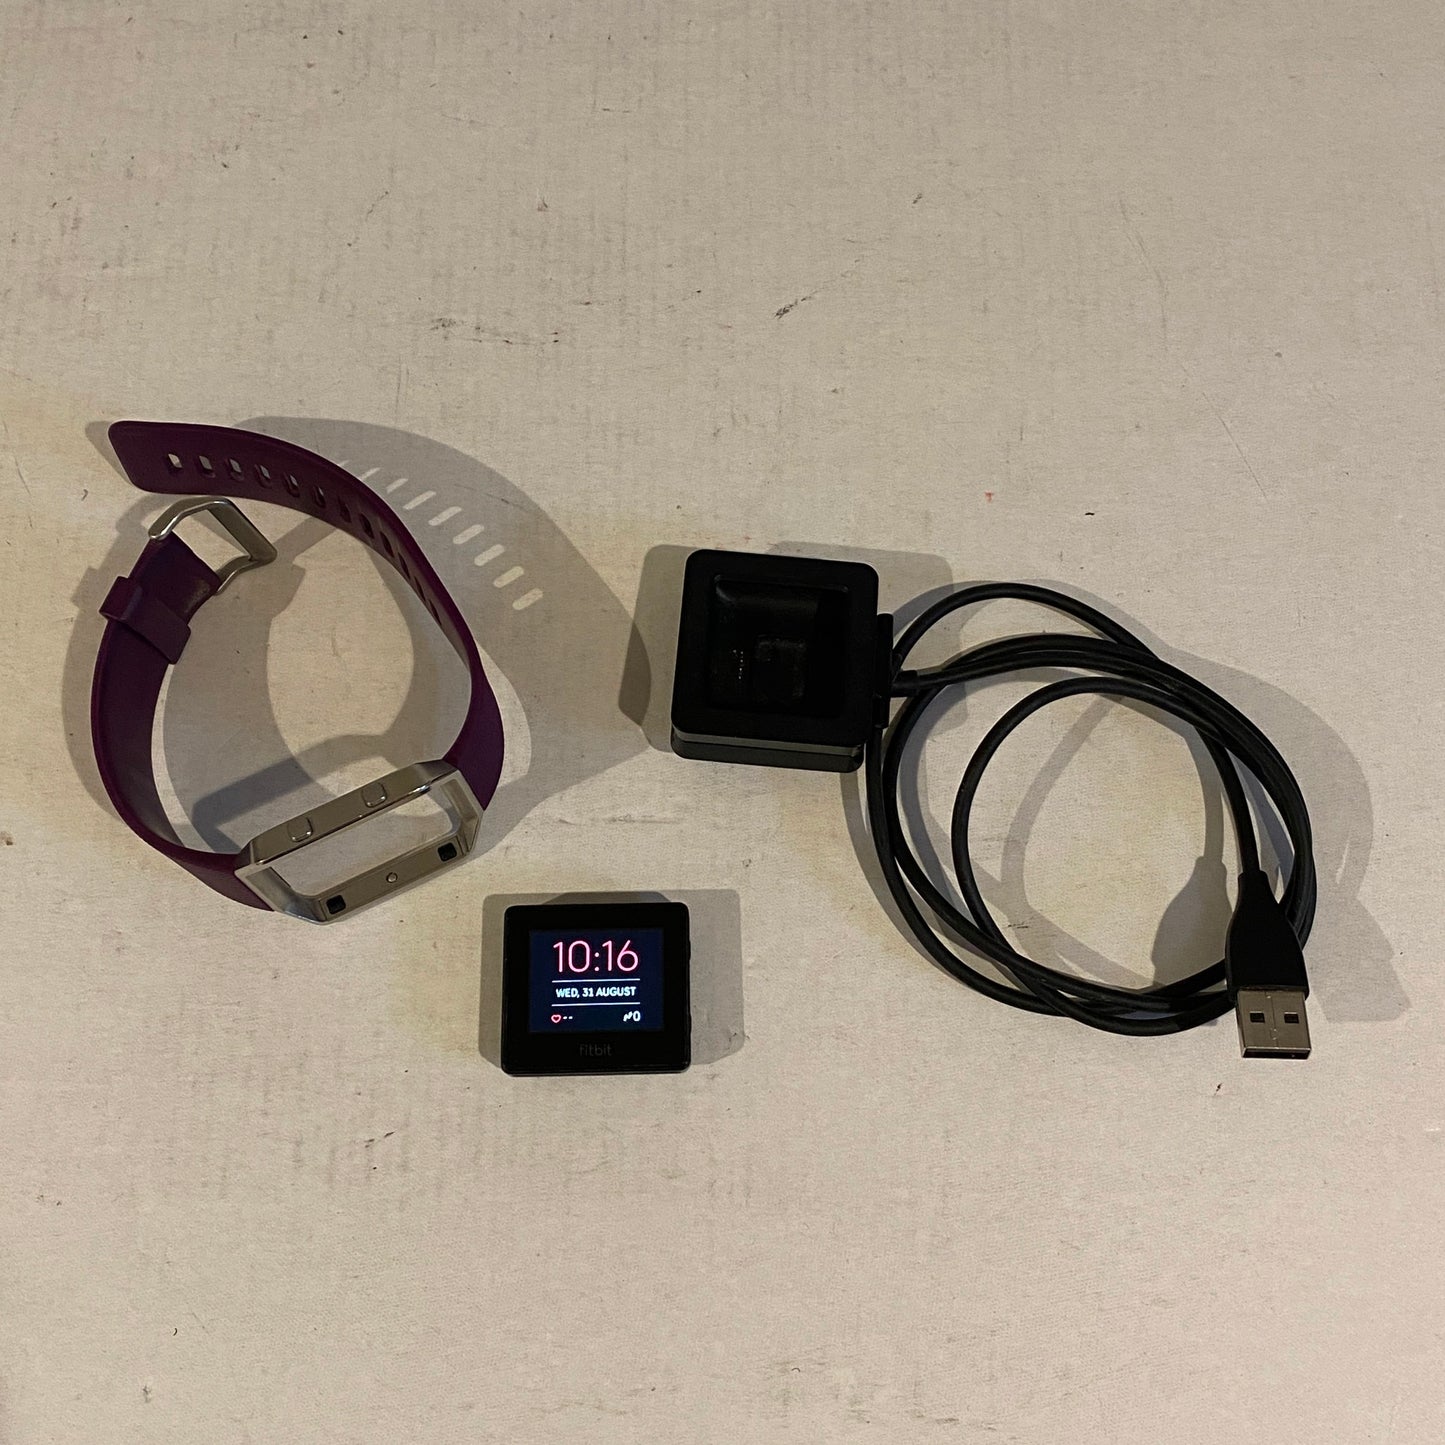 Fitbit Blaze with Purple Strap and Charger